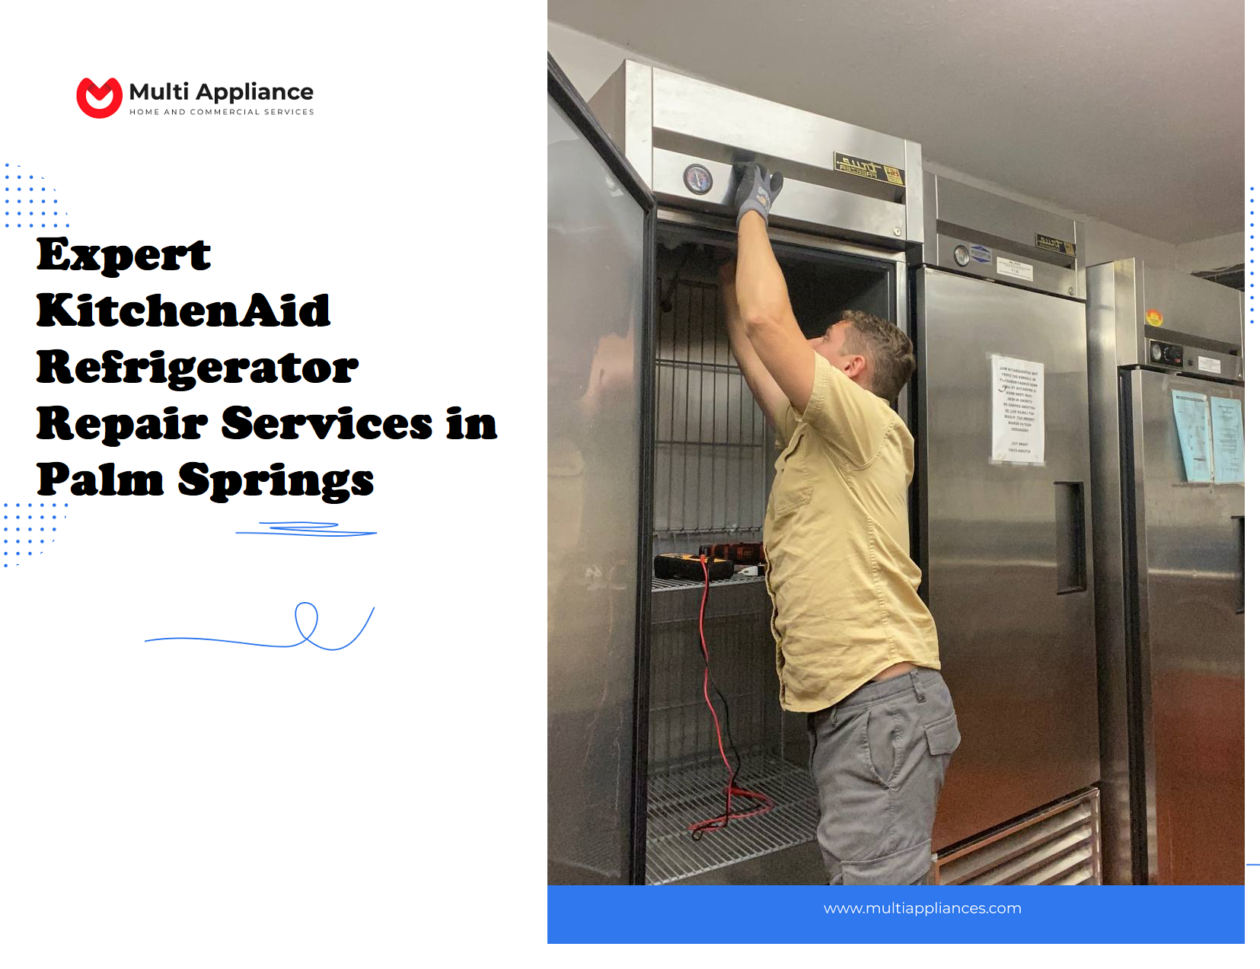 Expert KitchenAid Refrigerator Repair Services in Palm Springs